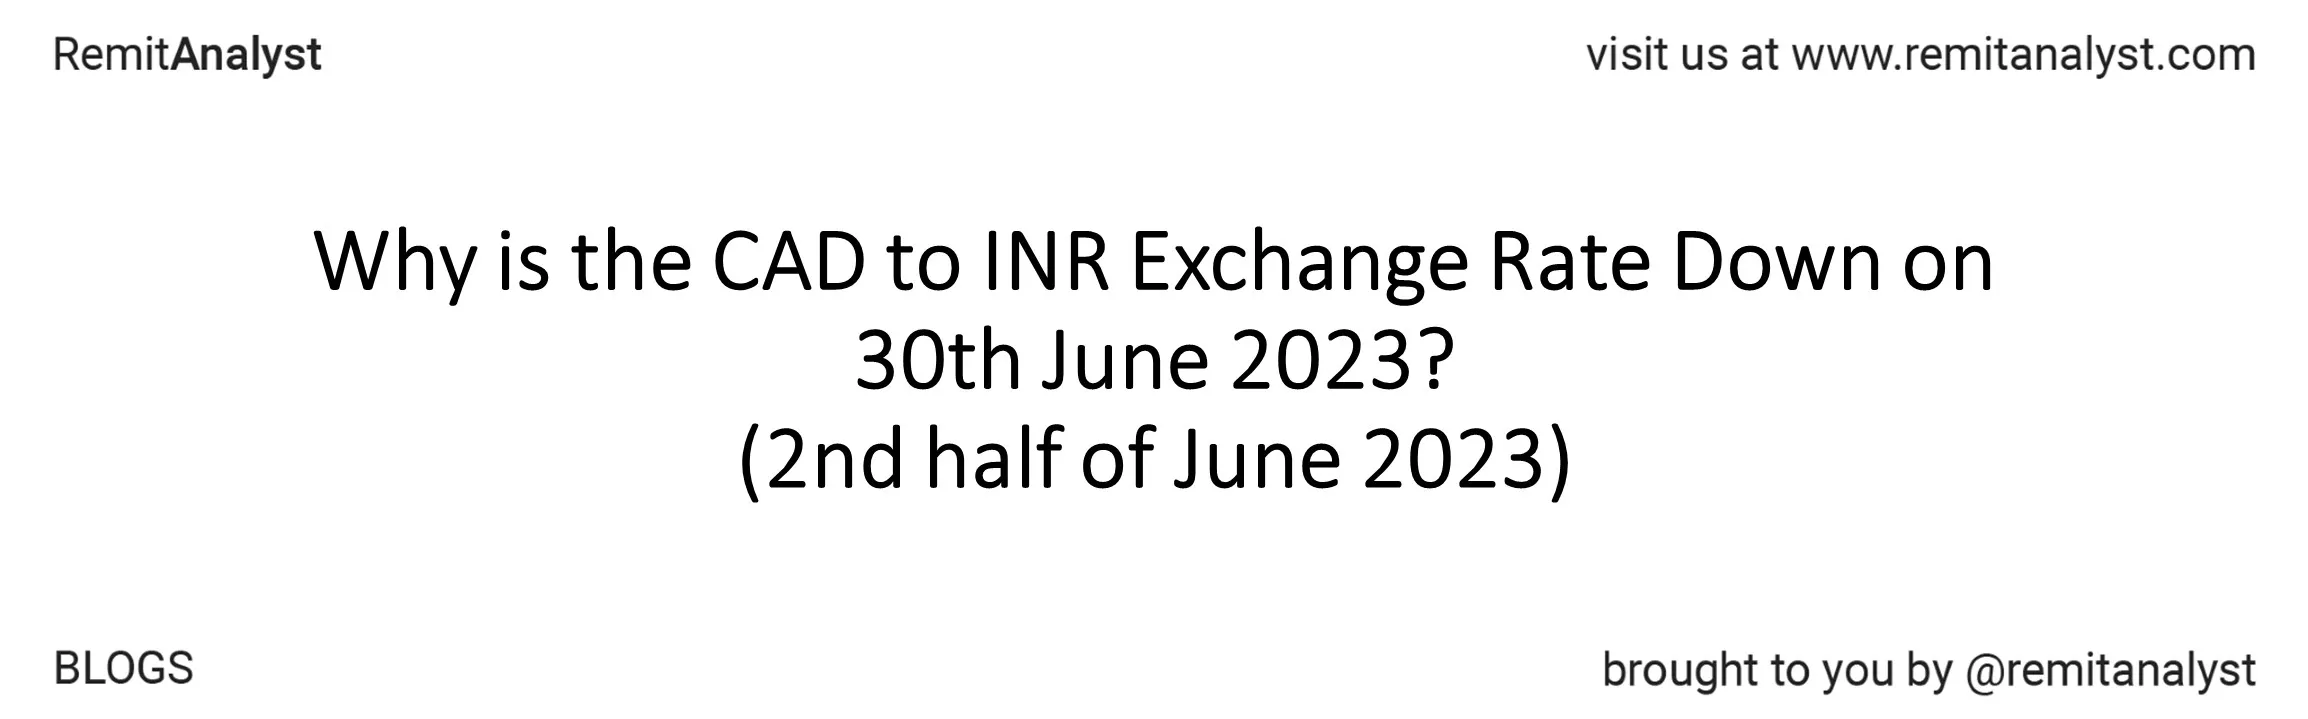 cad-to-inr-exchange-rate-from-16-june-2023-to-30-june-2023-title